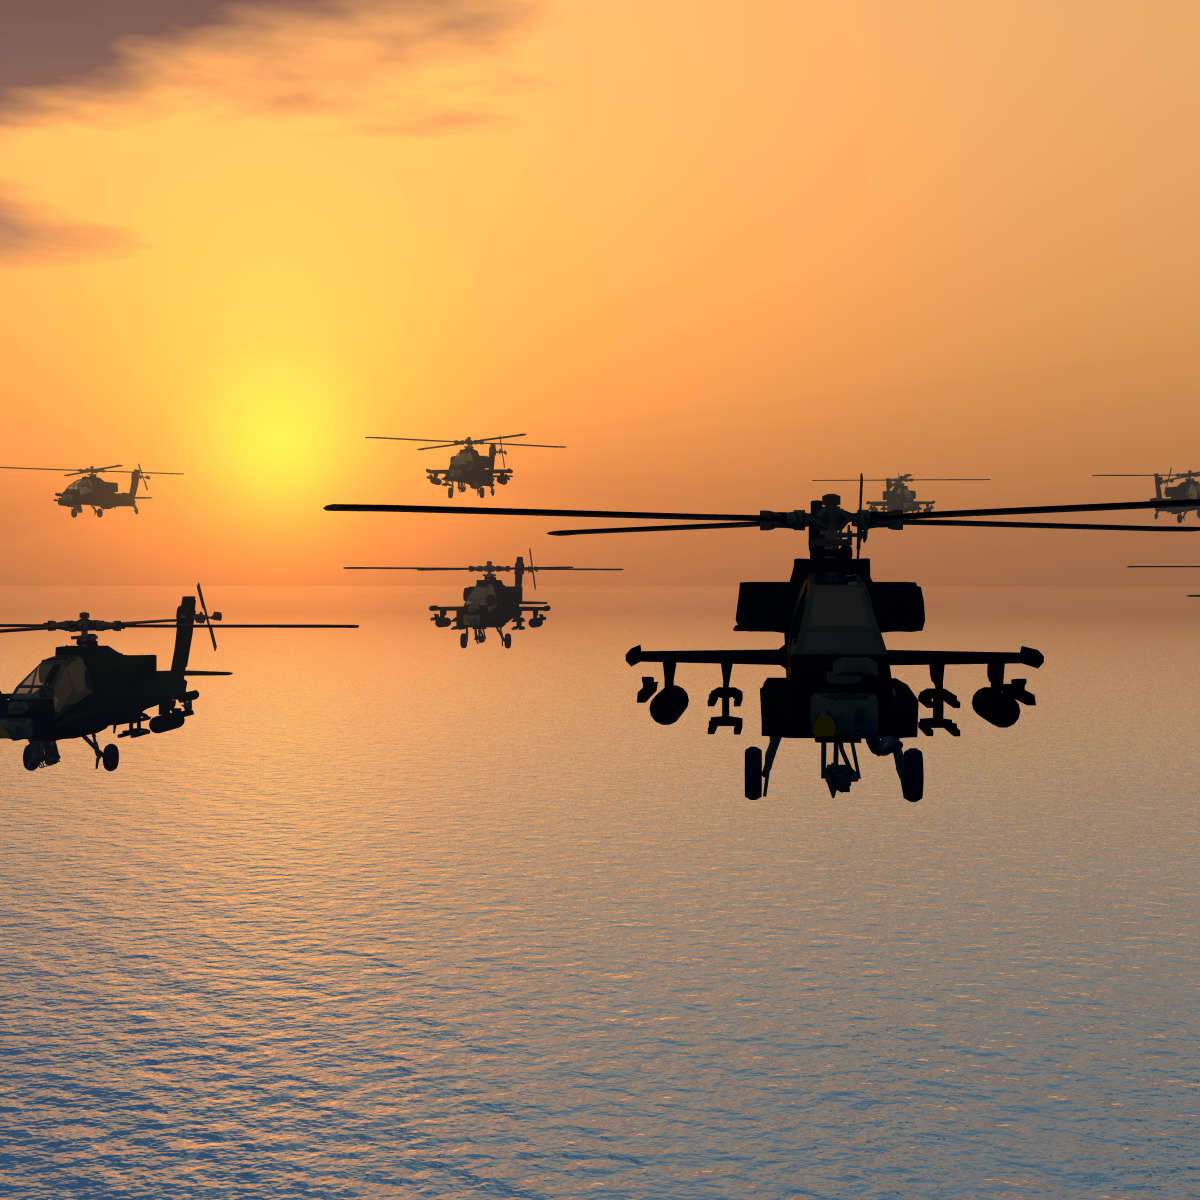 Military Helicopter Wall Art